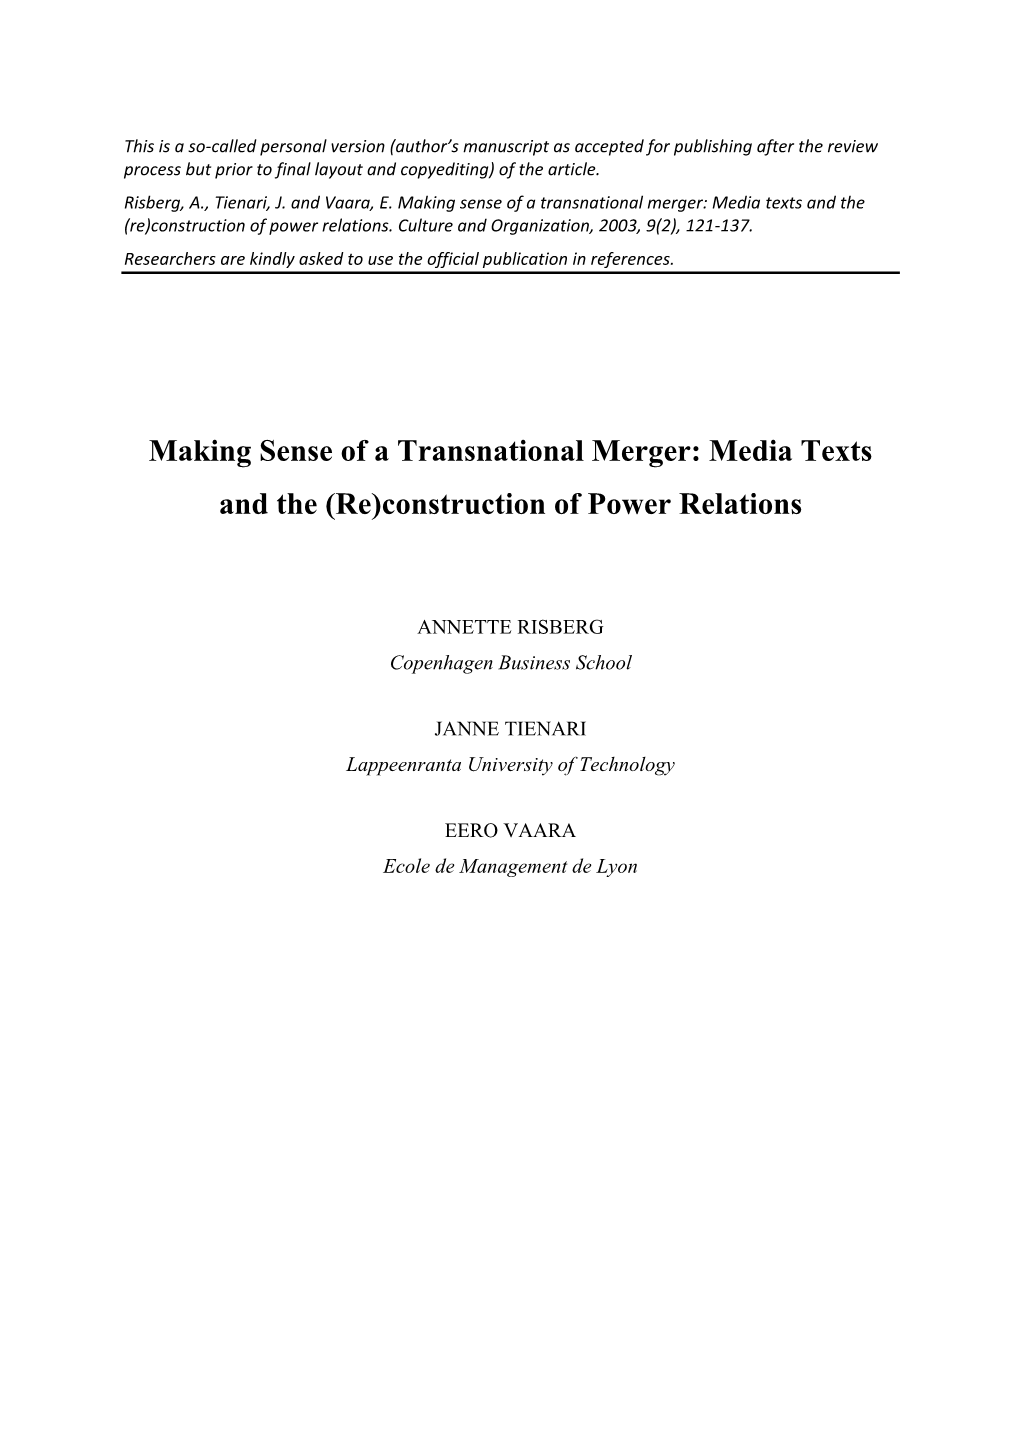 Making Sense of a Transnational Merger: Media Texts and the (Re)Construction of Power Relations